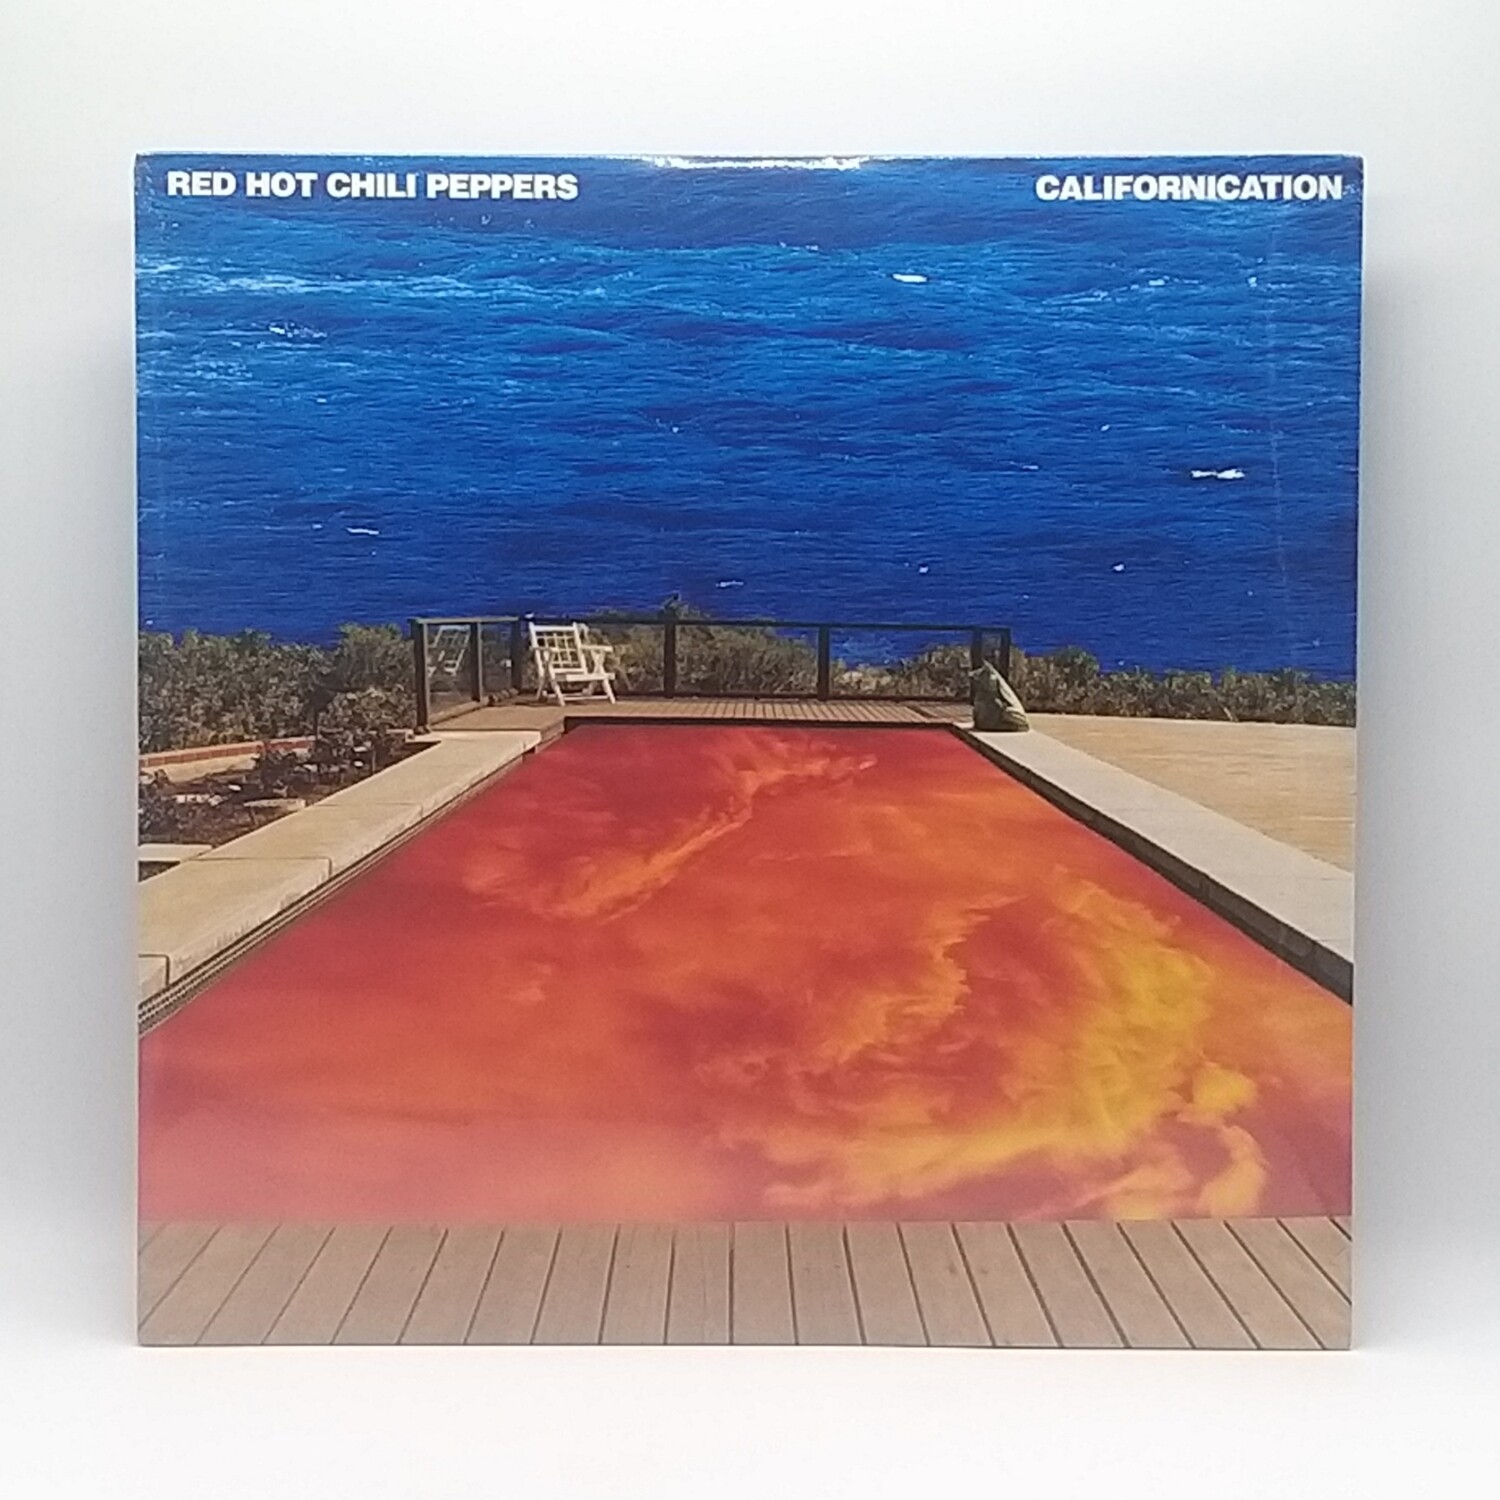 RED HOT CHILLI PEPPERS -CALIFORNICATION- 2XLP